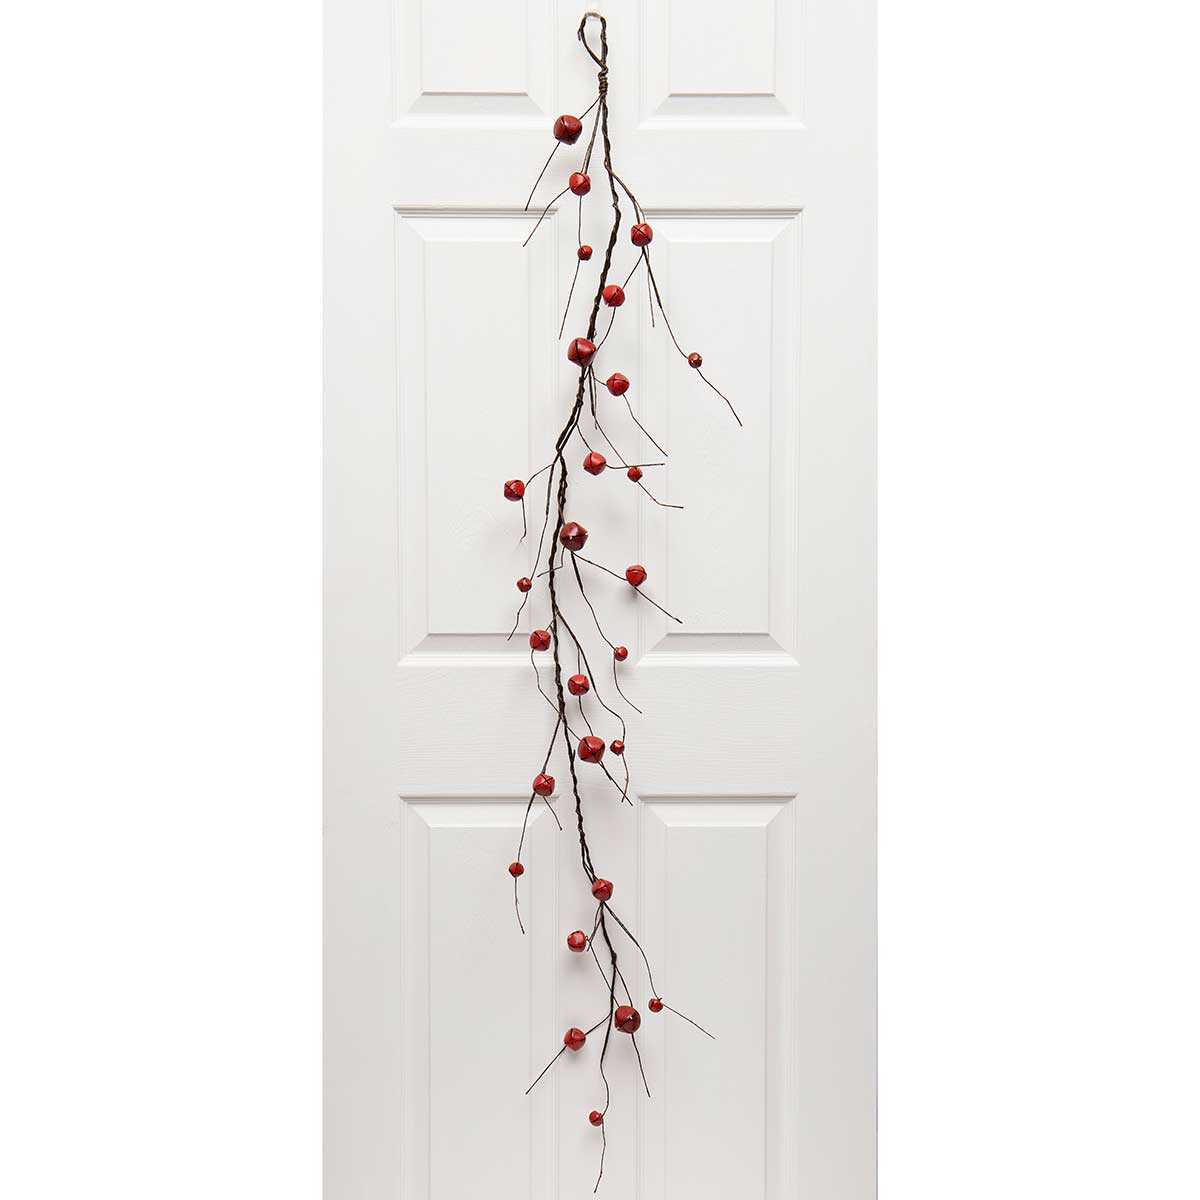 RED JINGLE BELL GARLAND 5'